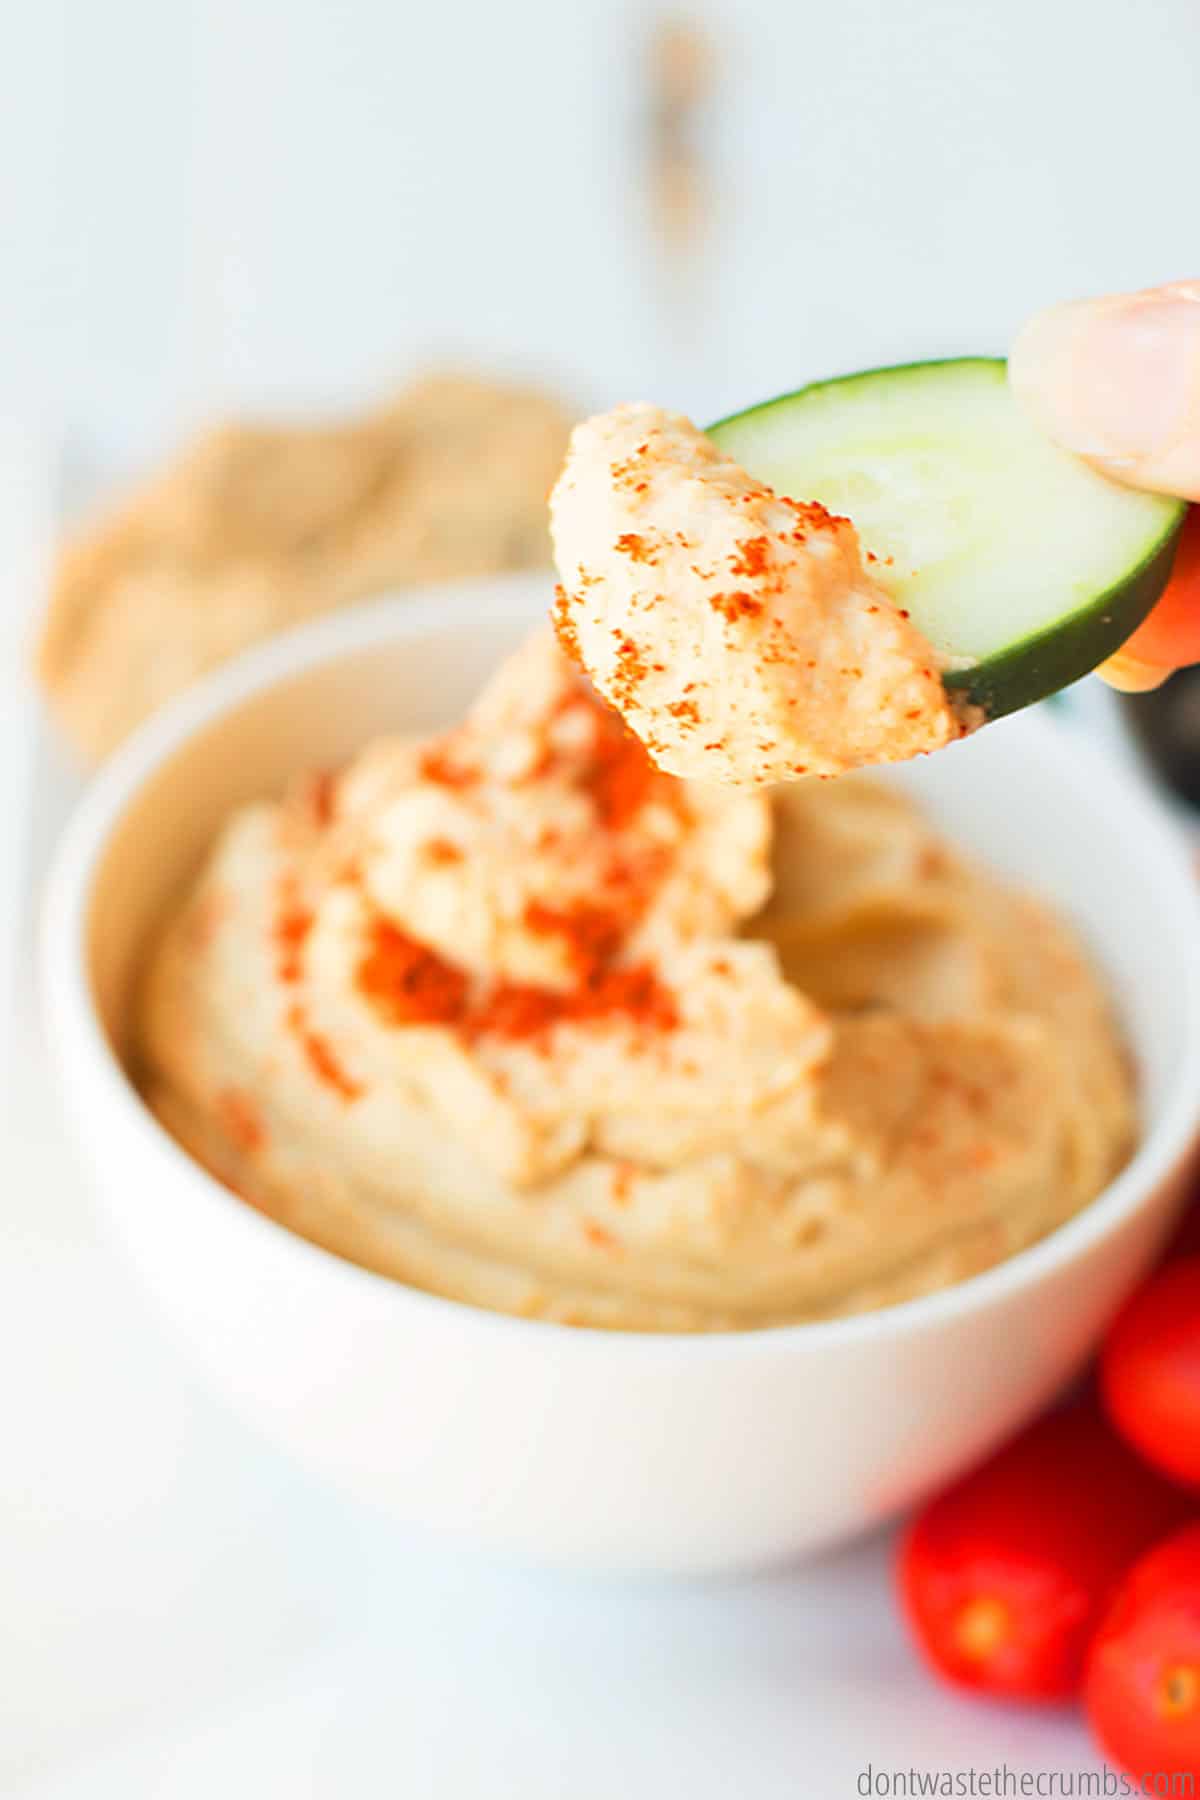 How to Make the Best Hummus Recipe (+ Video)